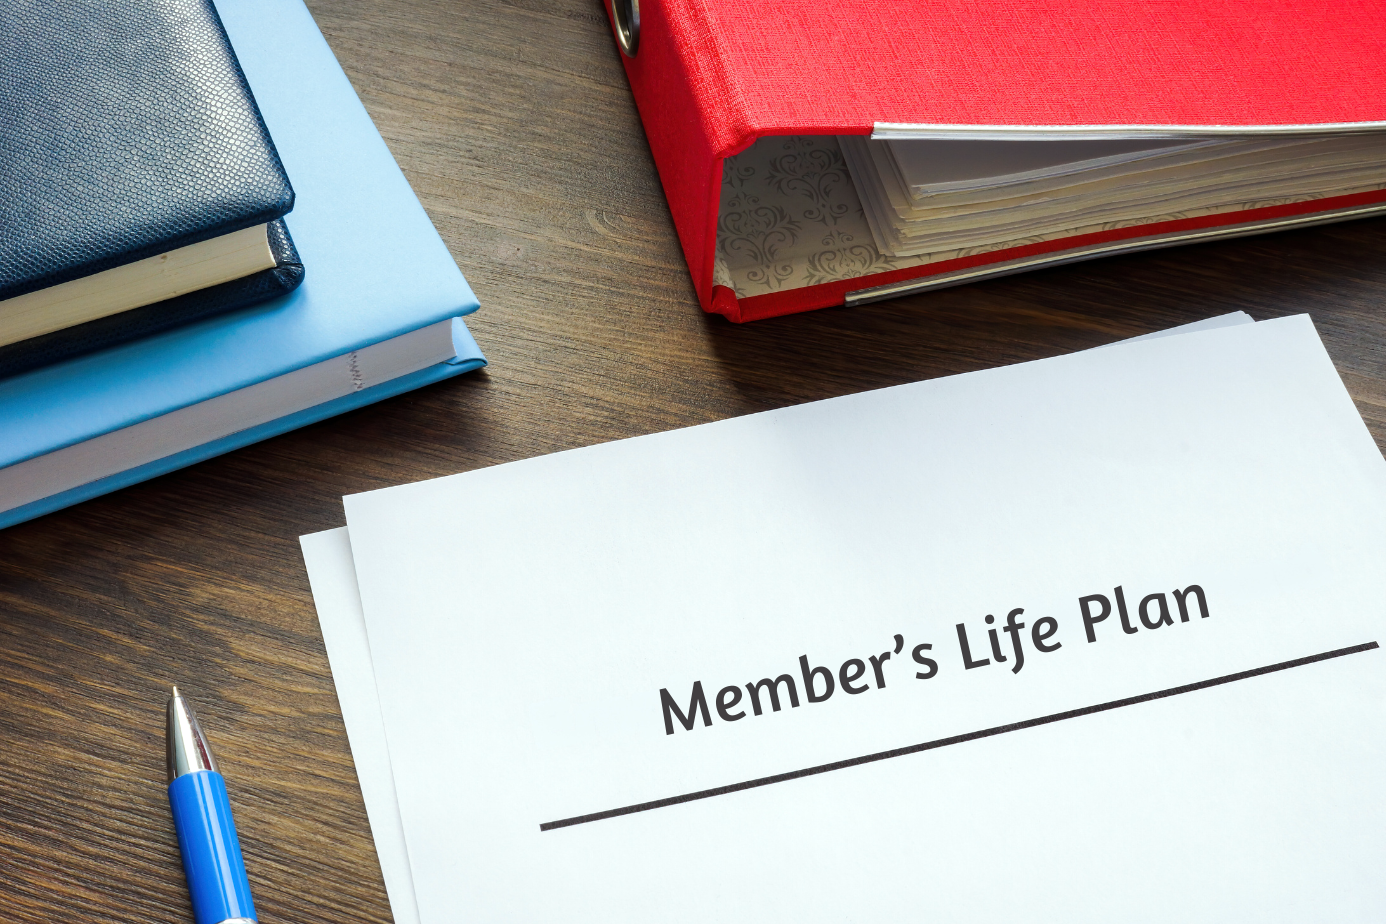 stacks of books and a pen appear need a document that reads "Member's Life Plan"